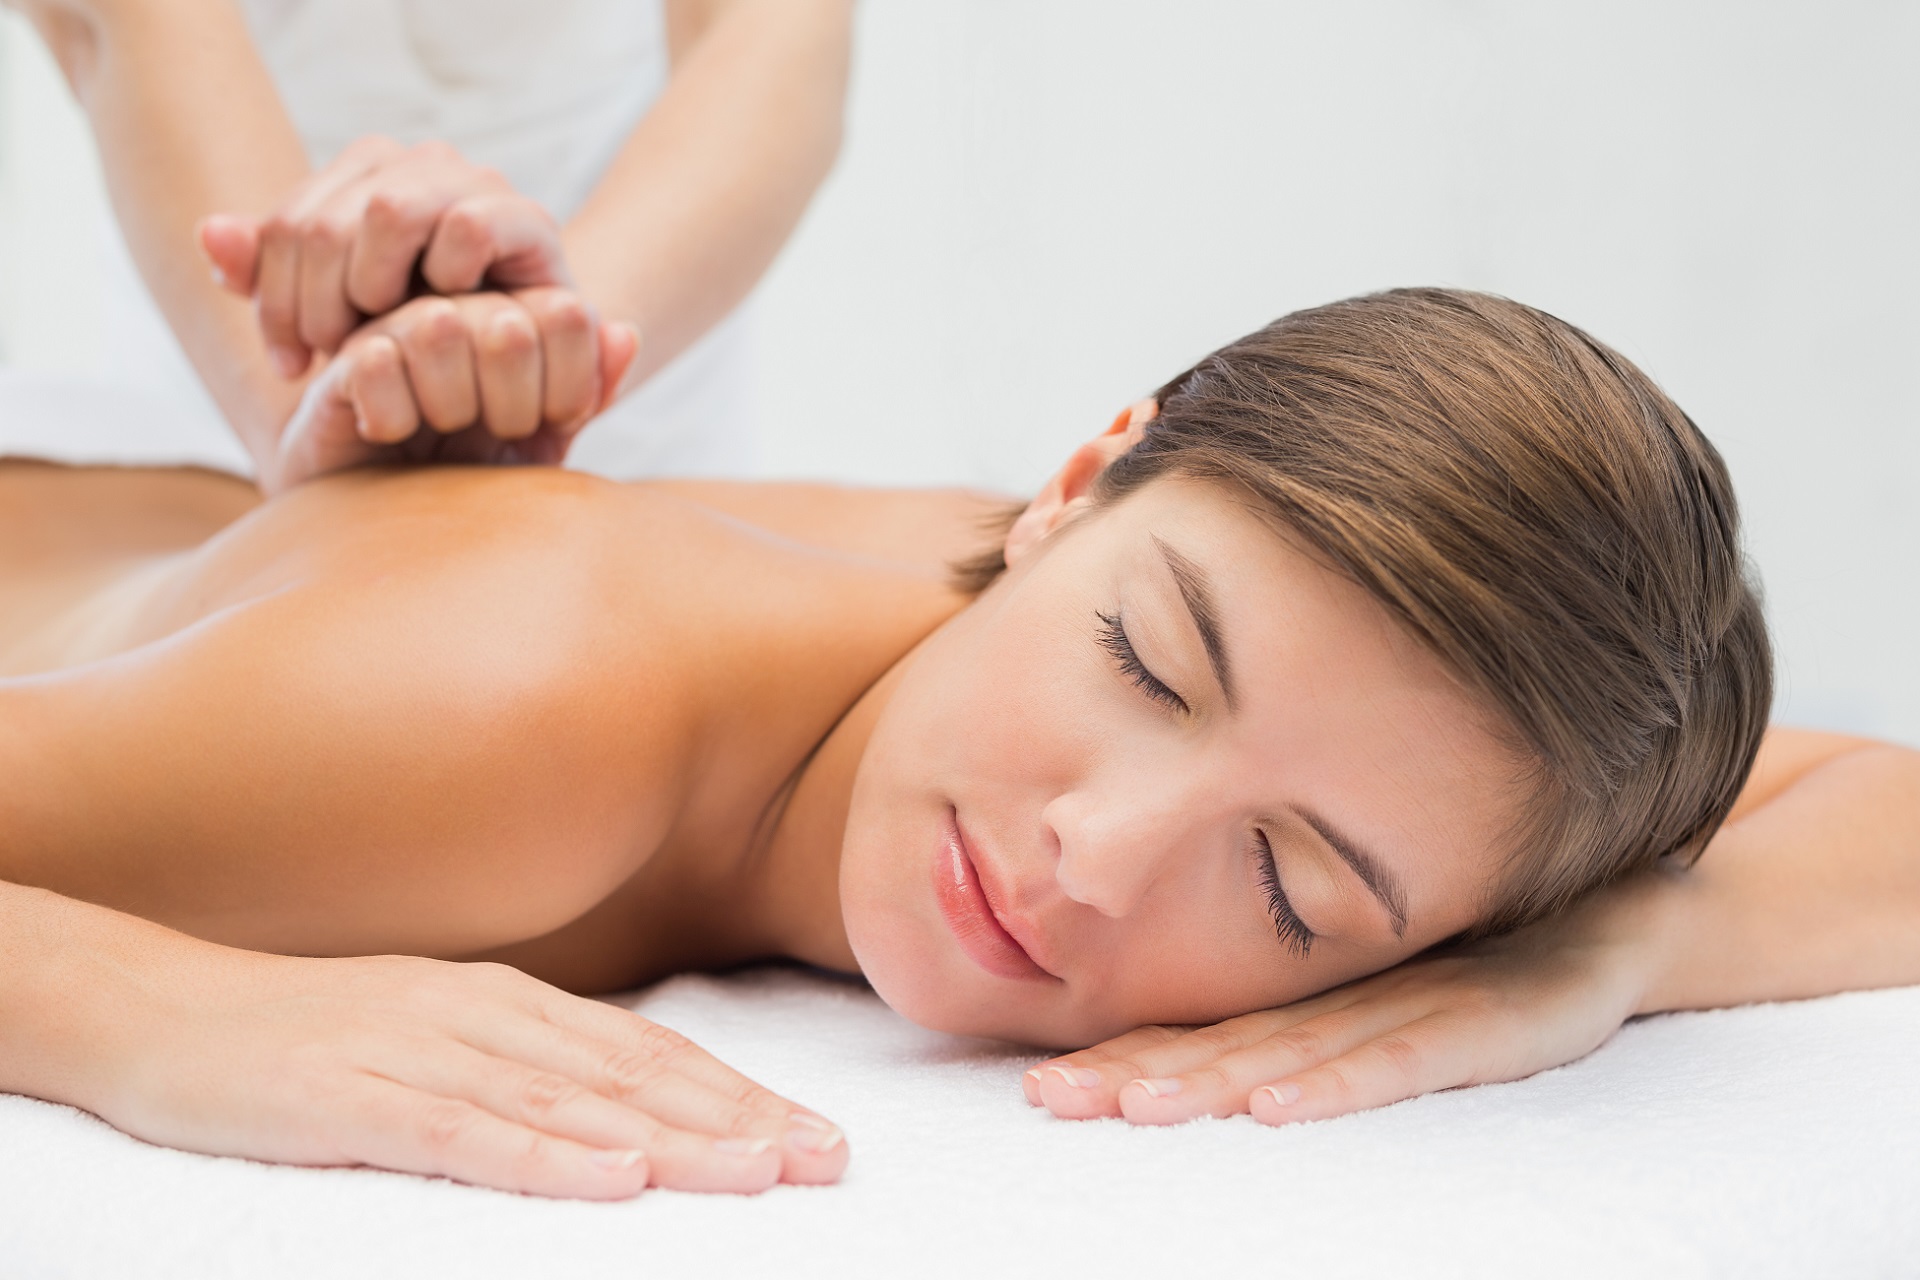 Discover Your Health With Registered Massage